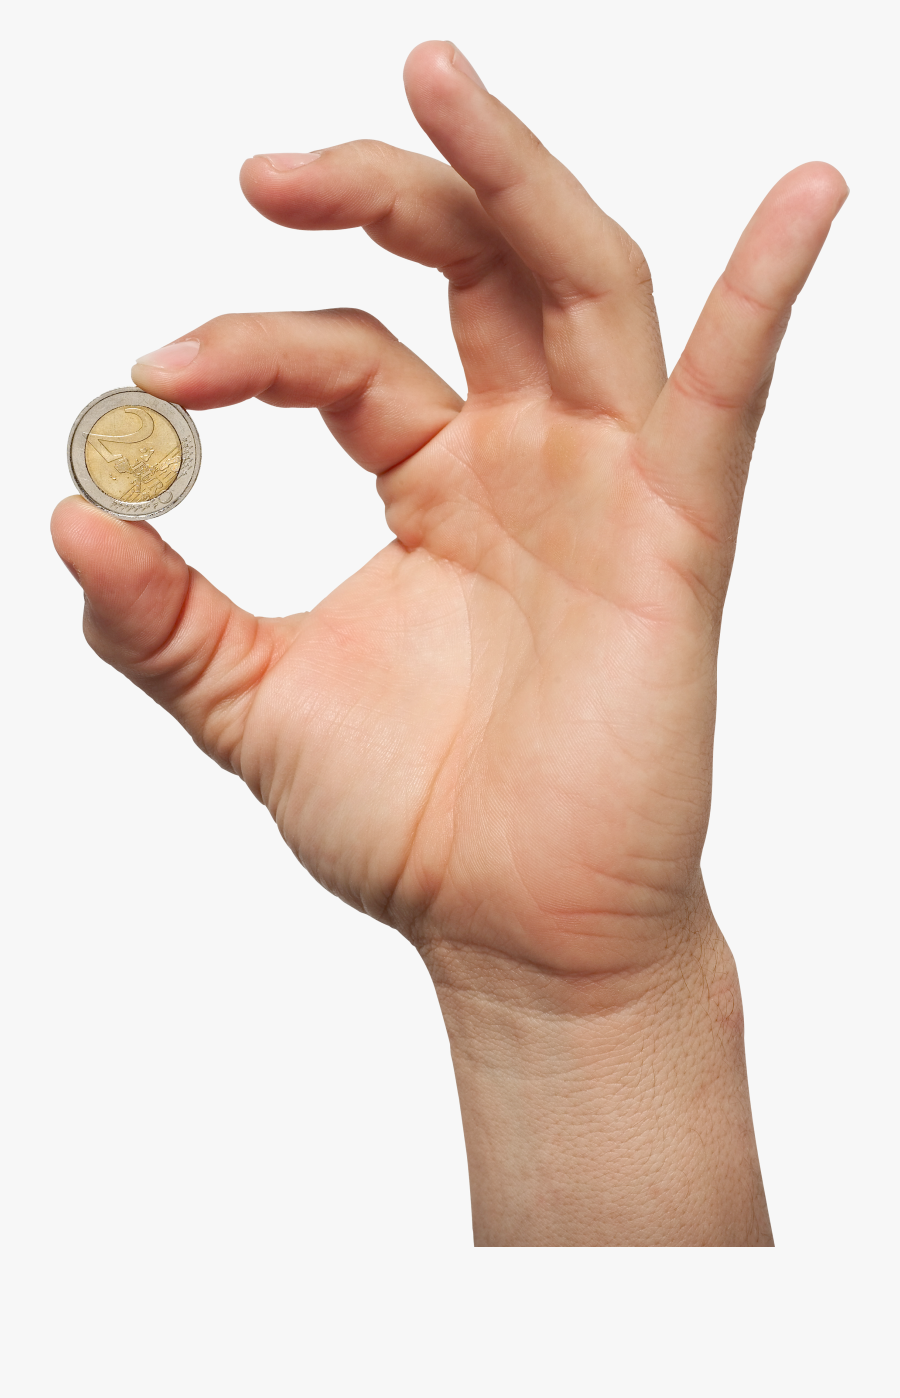 Holding Hands Png - Coin In Hand, Transparent Clipart